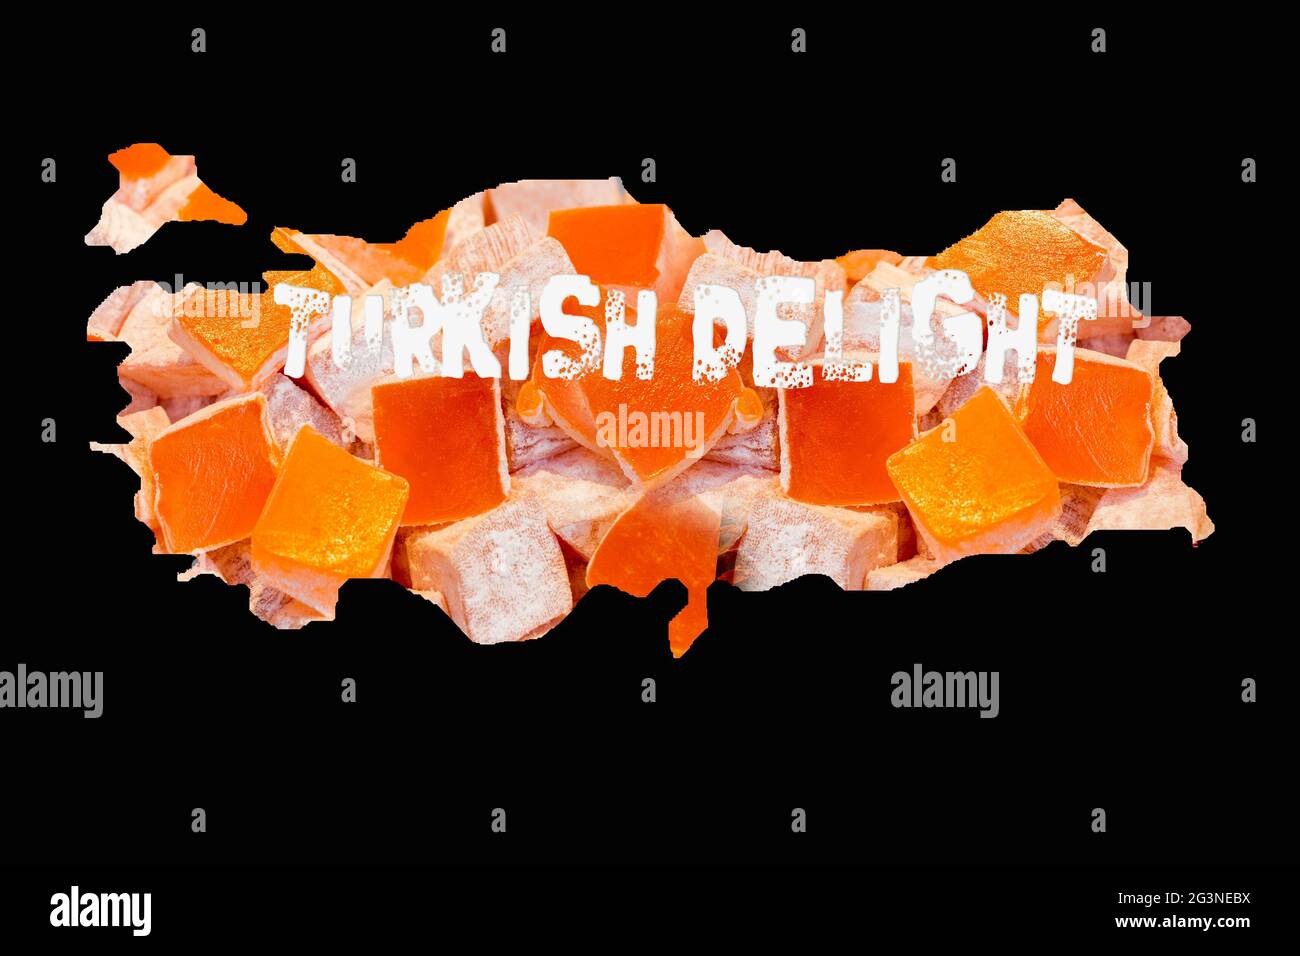 Roughly outlined map of Turkey with Turkish delight filling Stock Photo